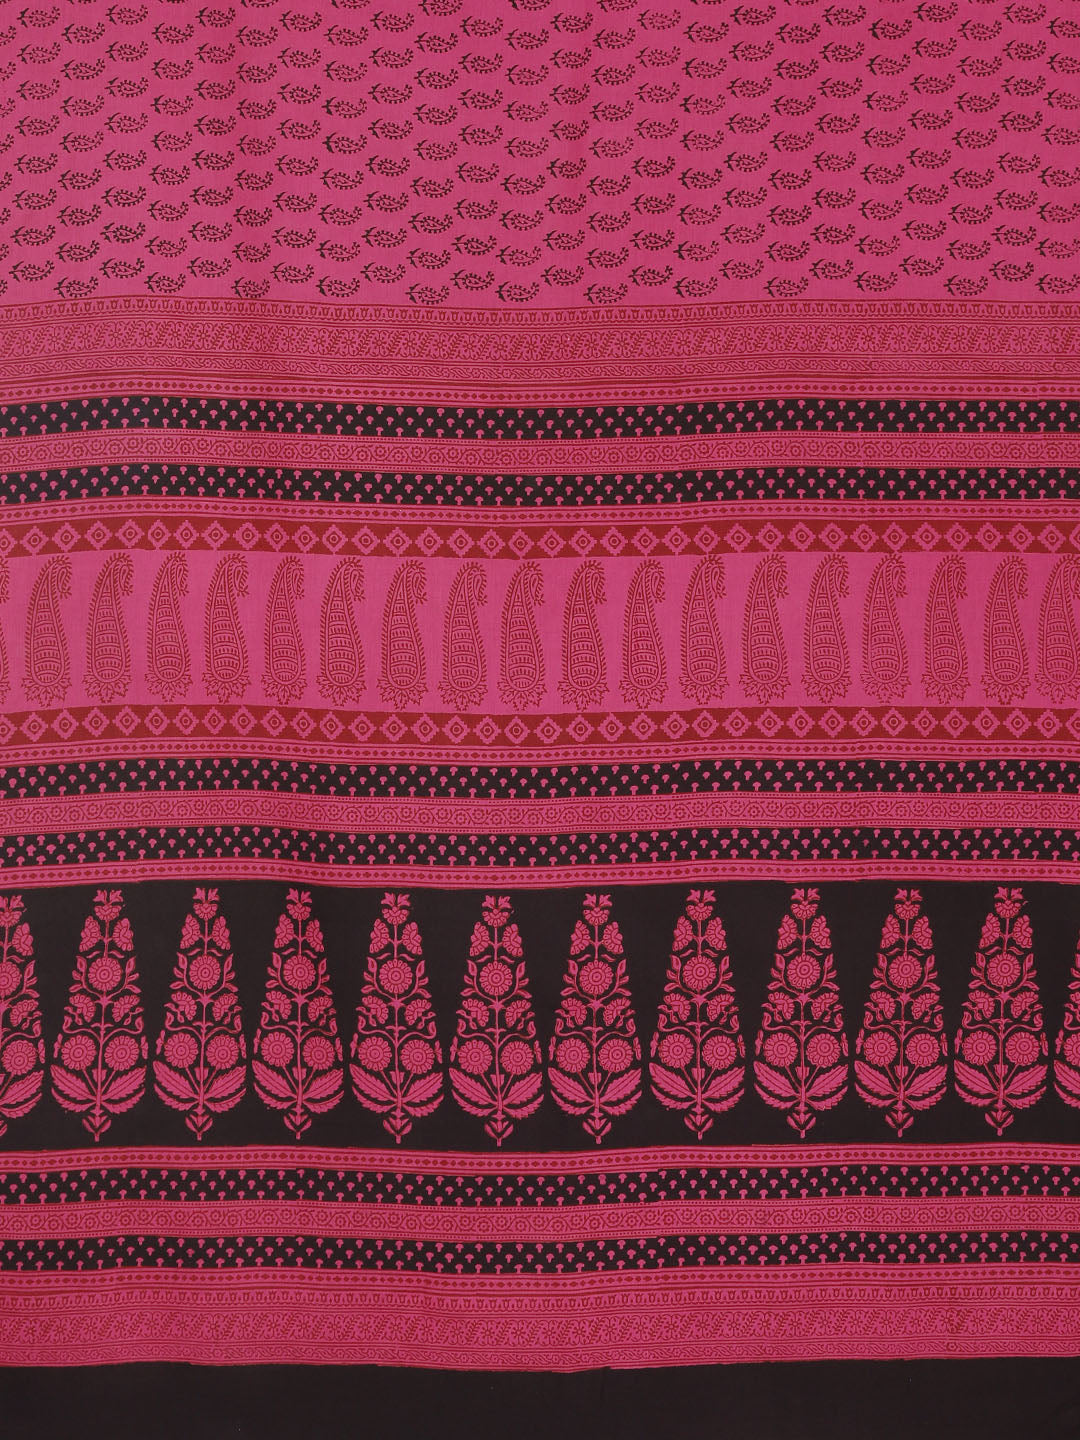 Pink and Black, Kalakari India Pink & Black Printed Bagh Saree ZIBASA0106-Saree-Kalakari India-ZIBASA0106-Bagh, Cotton, Geographical Indication, Hand Crafted, Heritage Prints, Natural Dyes, Red, Sarees, Sustainable Fabrics, Woven, Yellow-[Linen,Ethnic,wear,Fashionista,Handloom,Handicraft,Indigo,blockprint,block,print,Cotton,Chanderi,Blue, latest,classy,party,bollywood,trendy,summer,style,traditional,formal,elegant,unique,style,hand,block,print, dabu,booti,gift,present,glamorous,affordable,collec